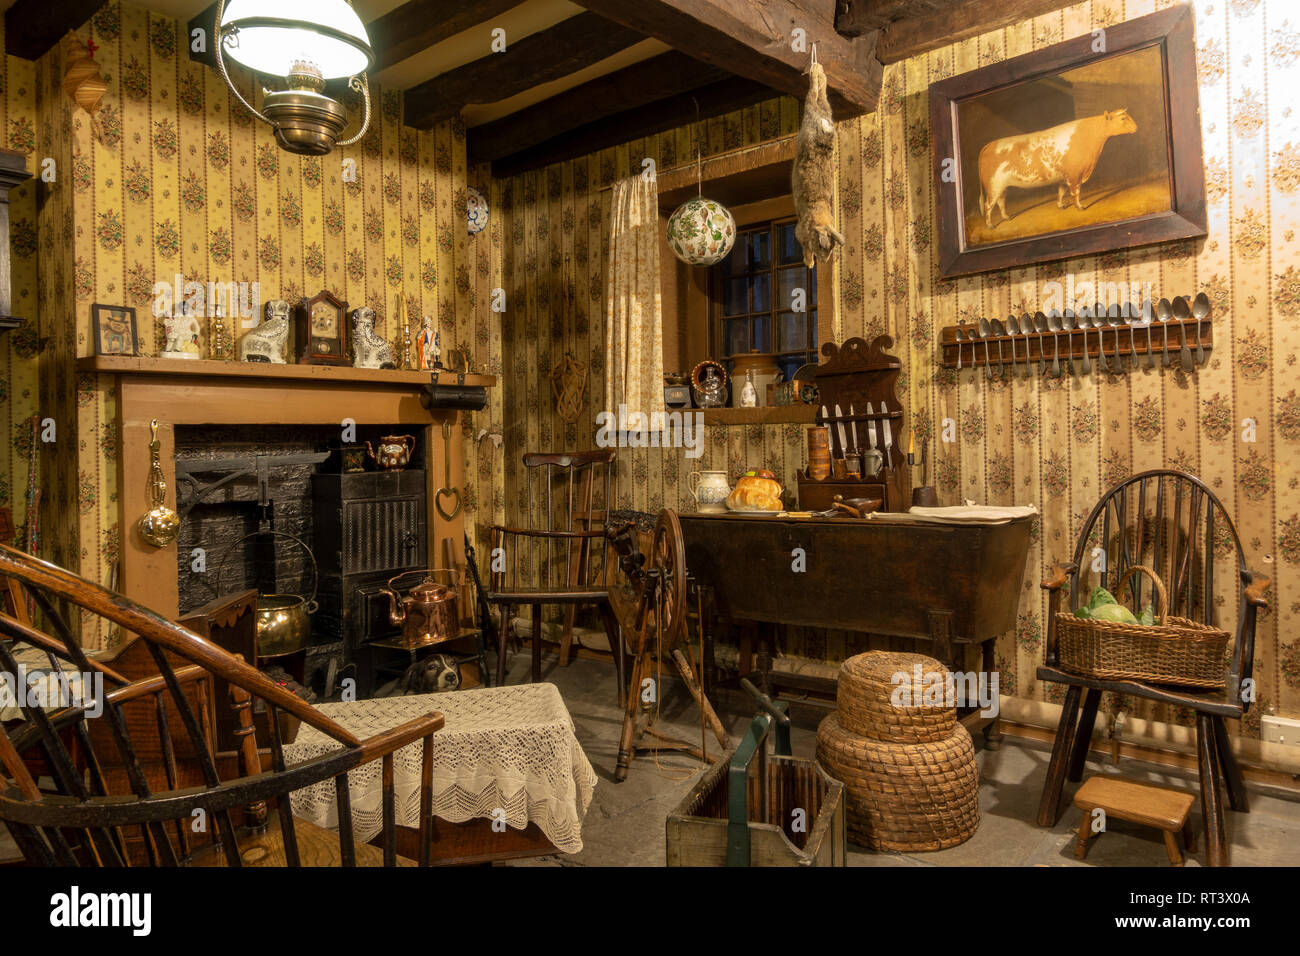 The Moorland Cottage display, showing the main family room in a rural farming area (mid-19th Century), York Castle Museum, York, Yorkshire, UK. Stock Photo